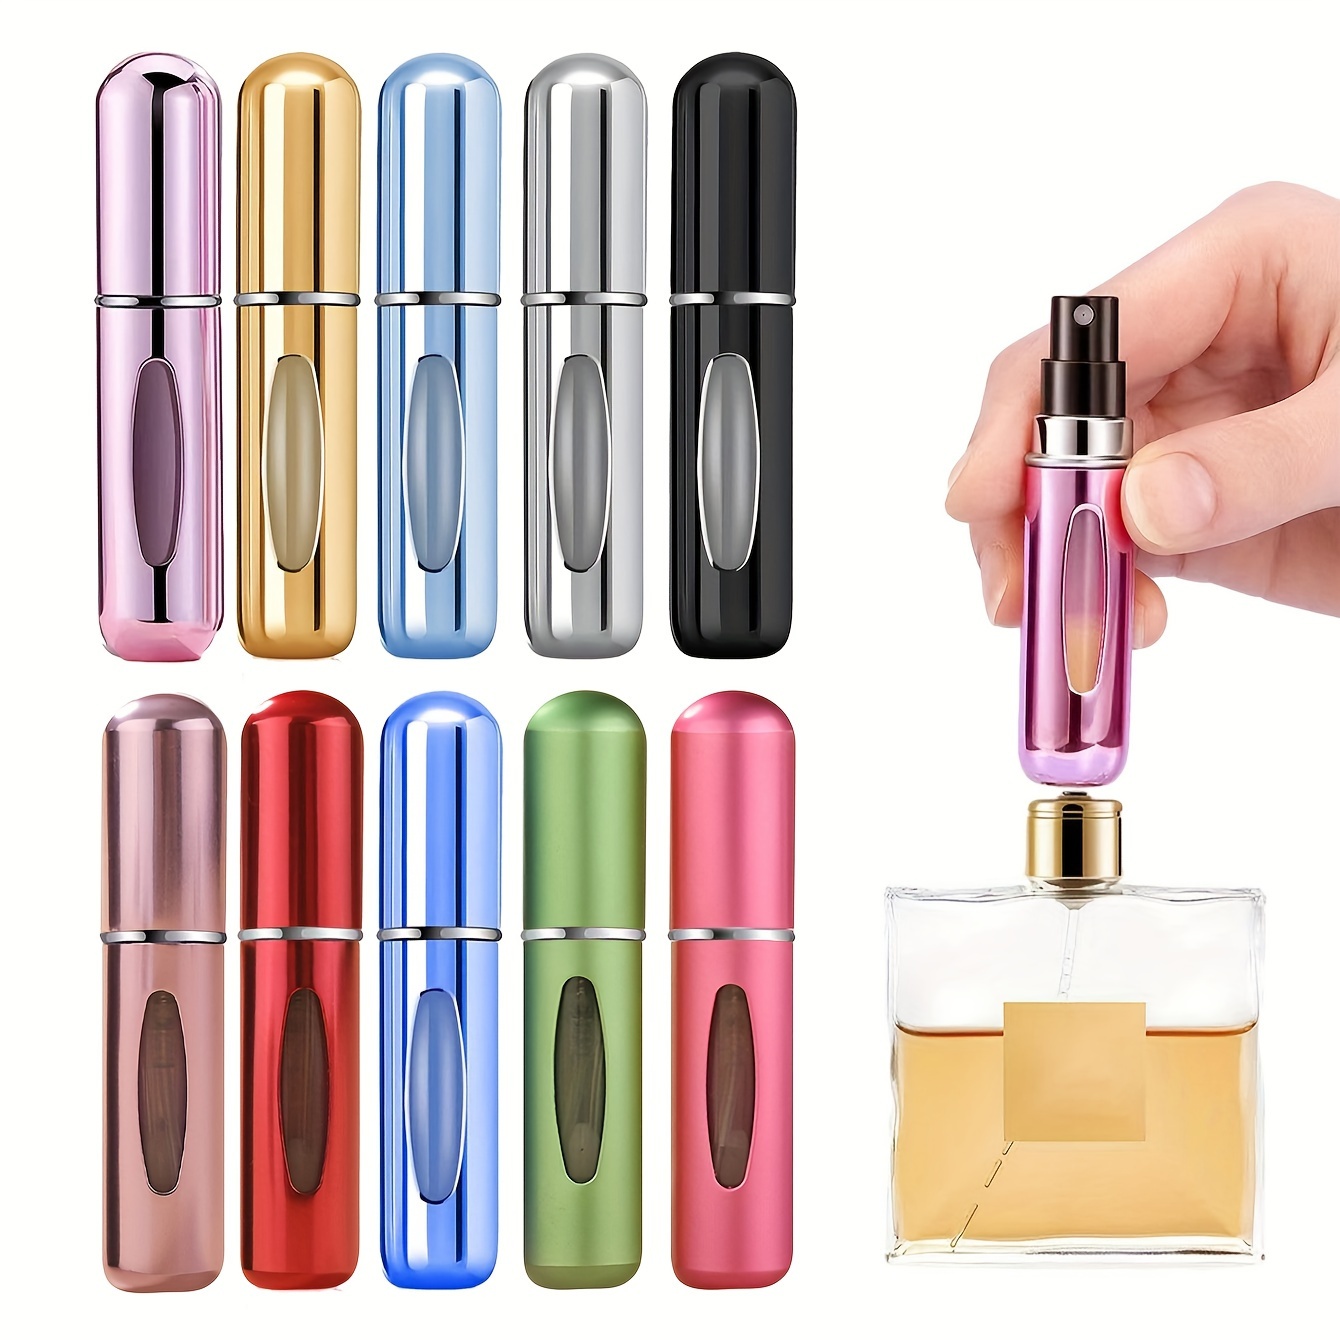 

10-pack Refillable Travel Perfume Atomizer Spray Bottles, 5ml - Portable Mini Sprayer With Anodized Aluminum Nozzle, Leakproof, Pvc Free, Unscented, Metal Construction For Fragrance & Essential Oils